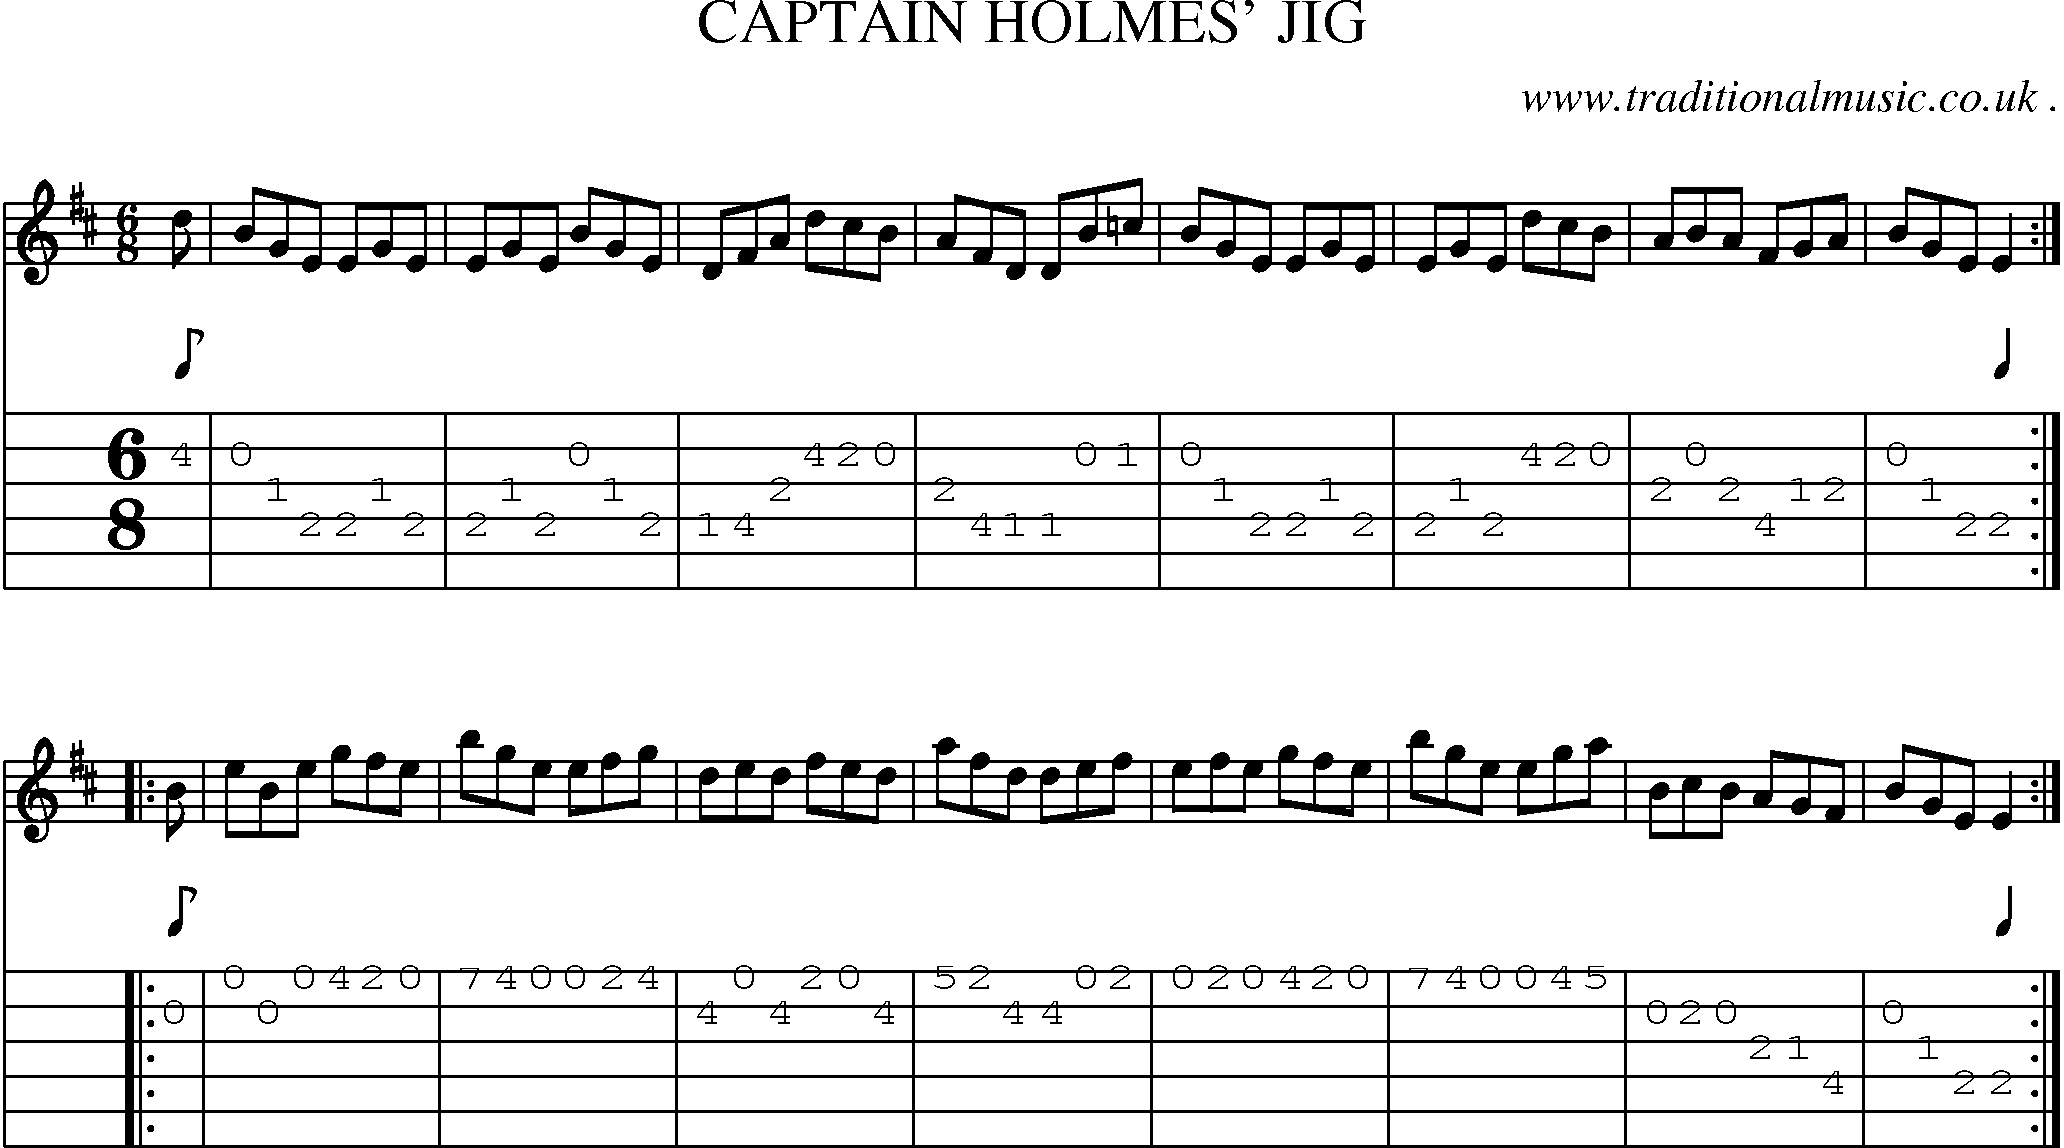 Sheet-Music and Guitar Tabs for Captain Holmes Jig